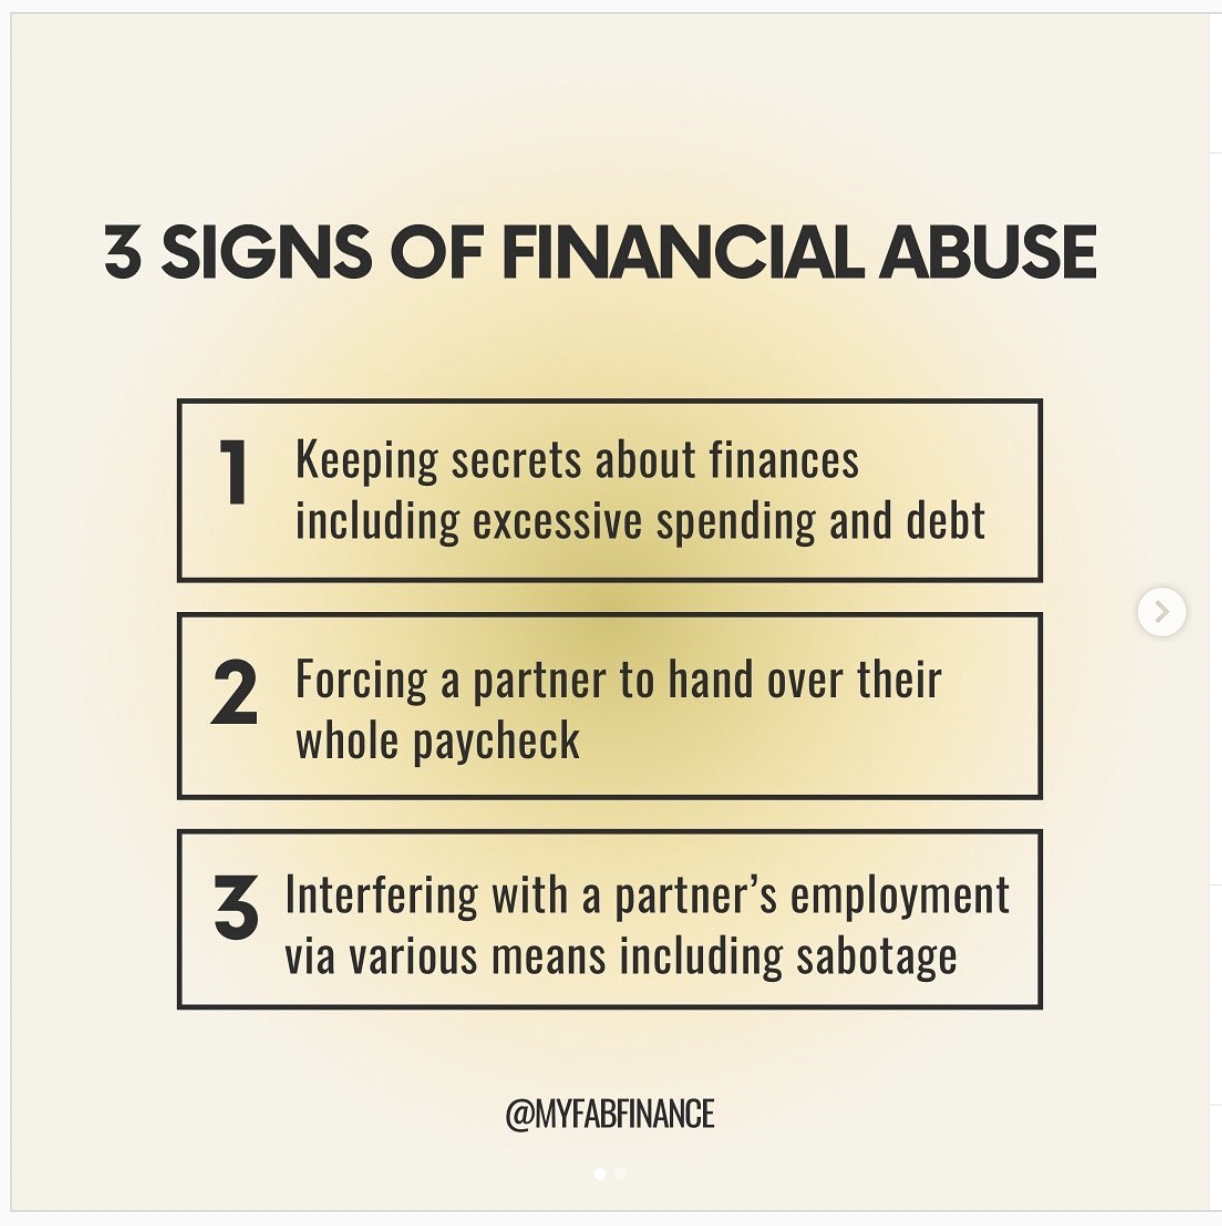 Signs of financial abuse by MyFabFinance